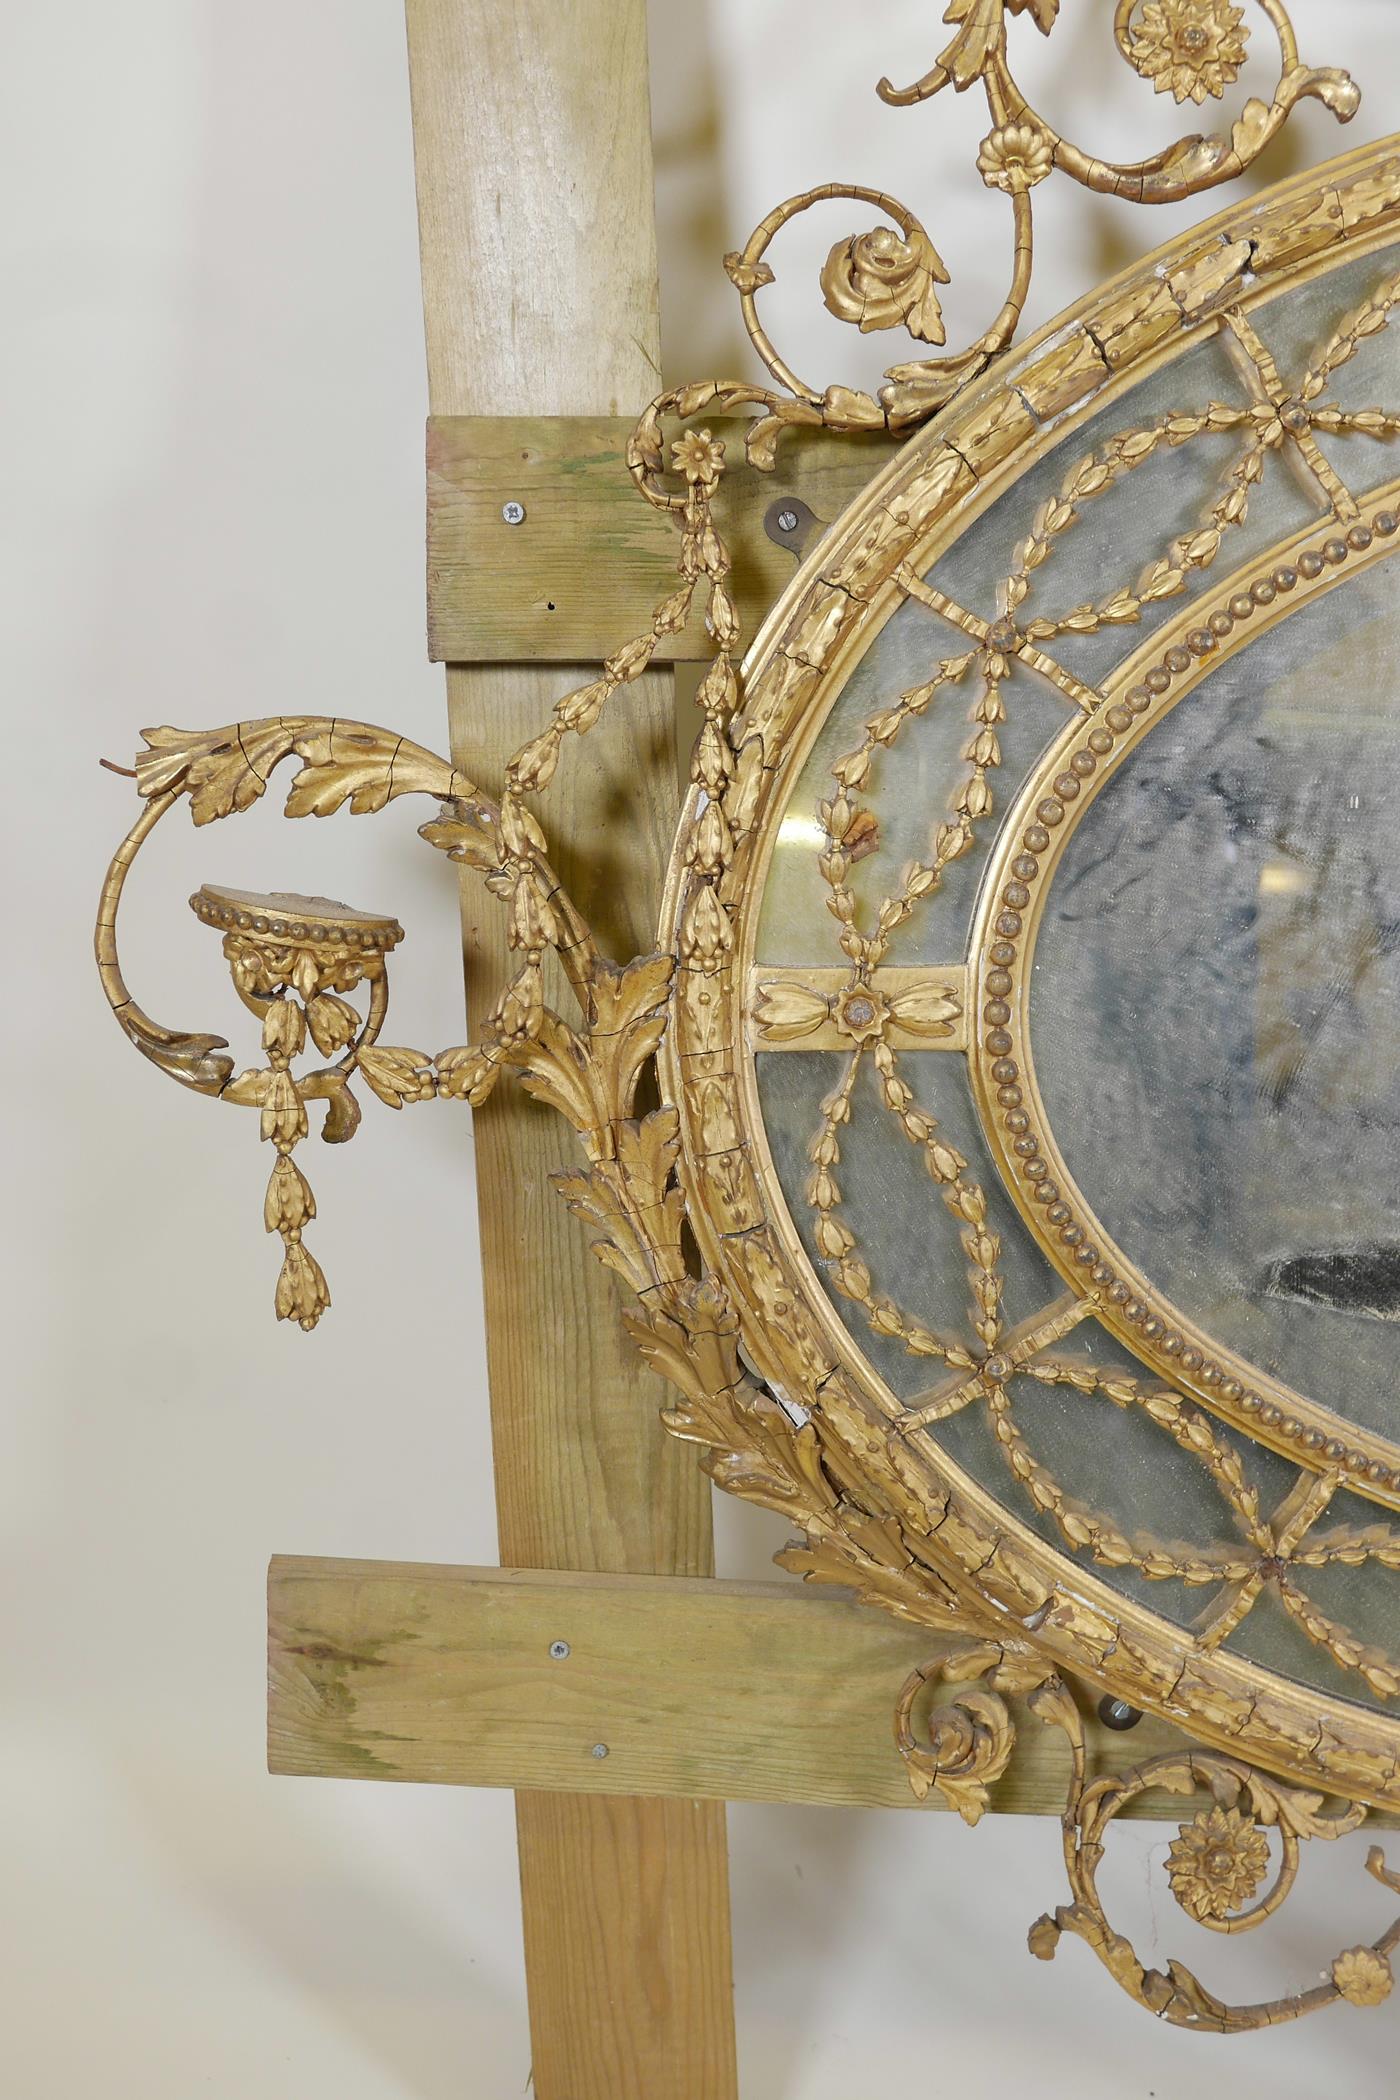 A C19th Adam style giltwood and composition sectional hall mirror, A/F, 60" x 46" - Image 6 of 7